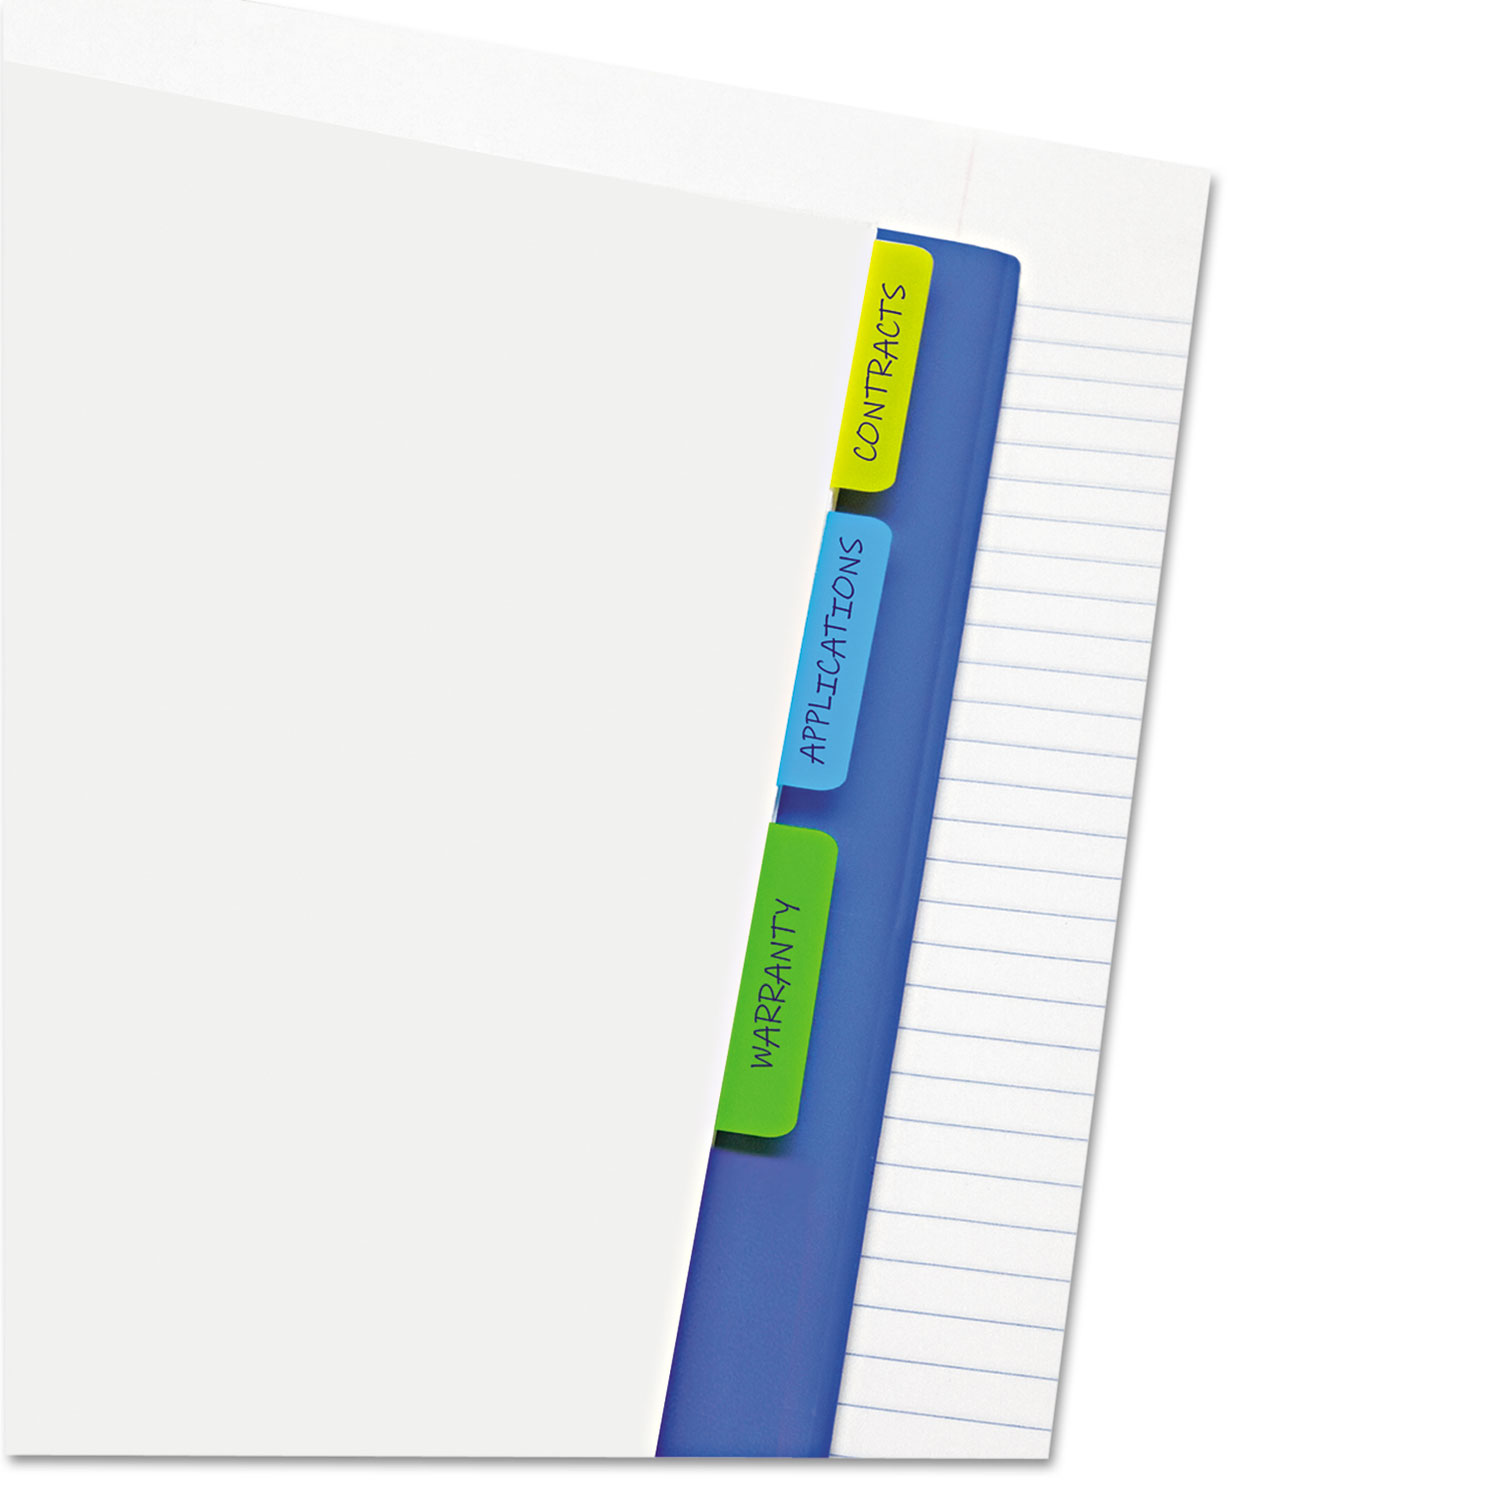 Write-On Self-Stick Index Tabs, 1 1/2 x 2, Blue, Green, Yellow, 30/Pack